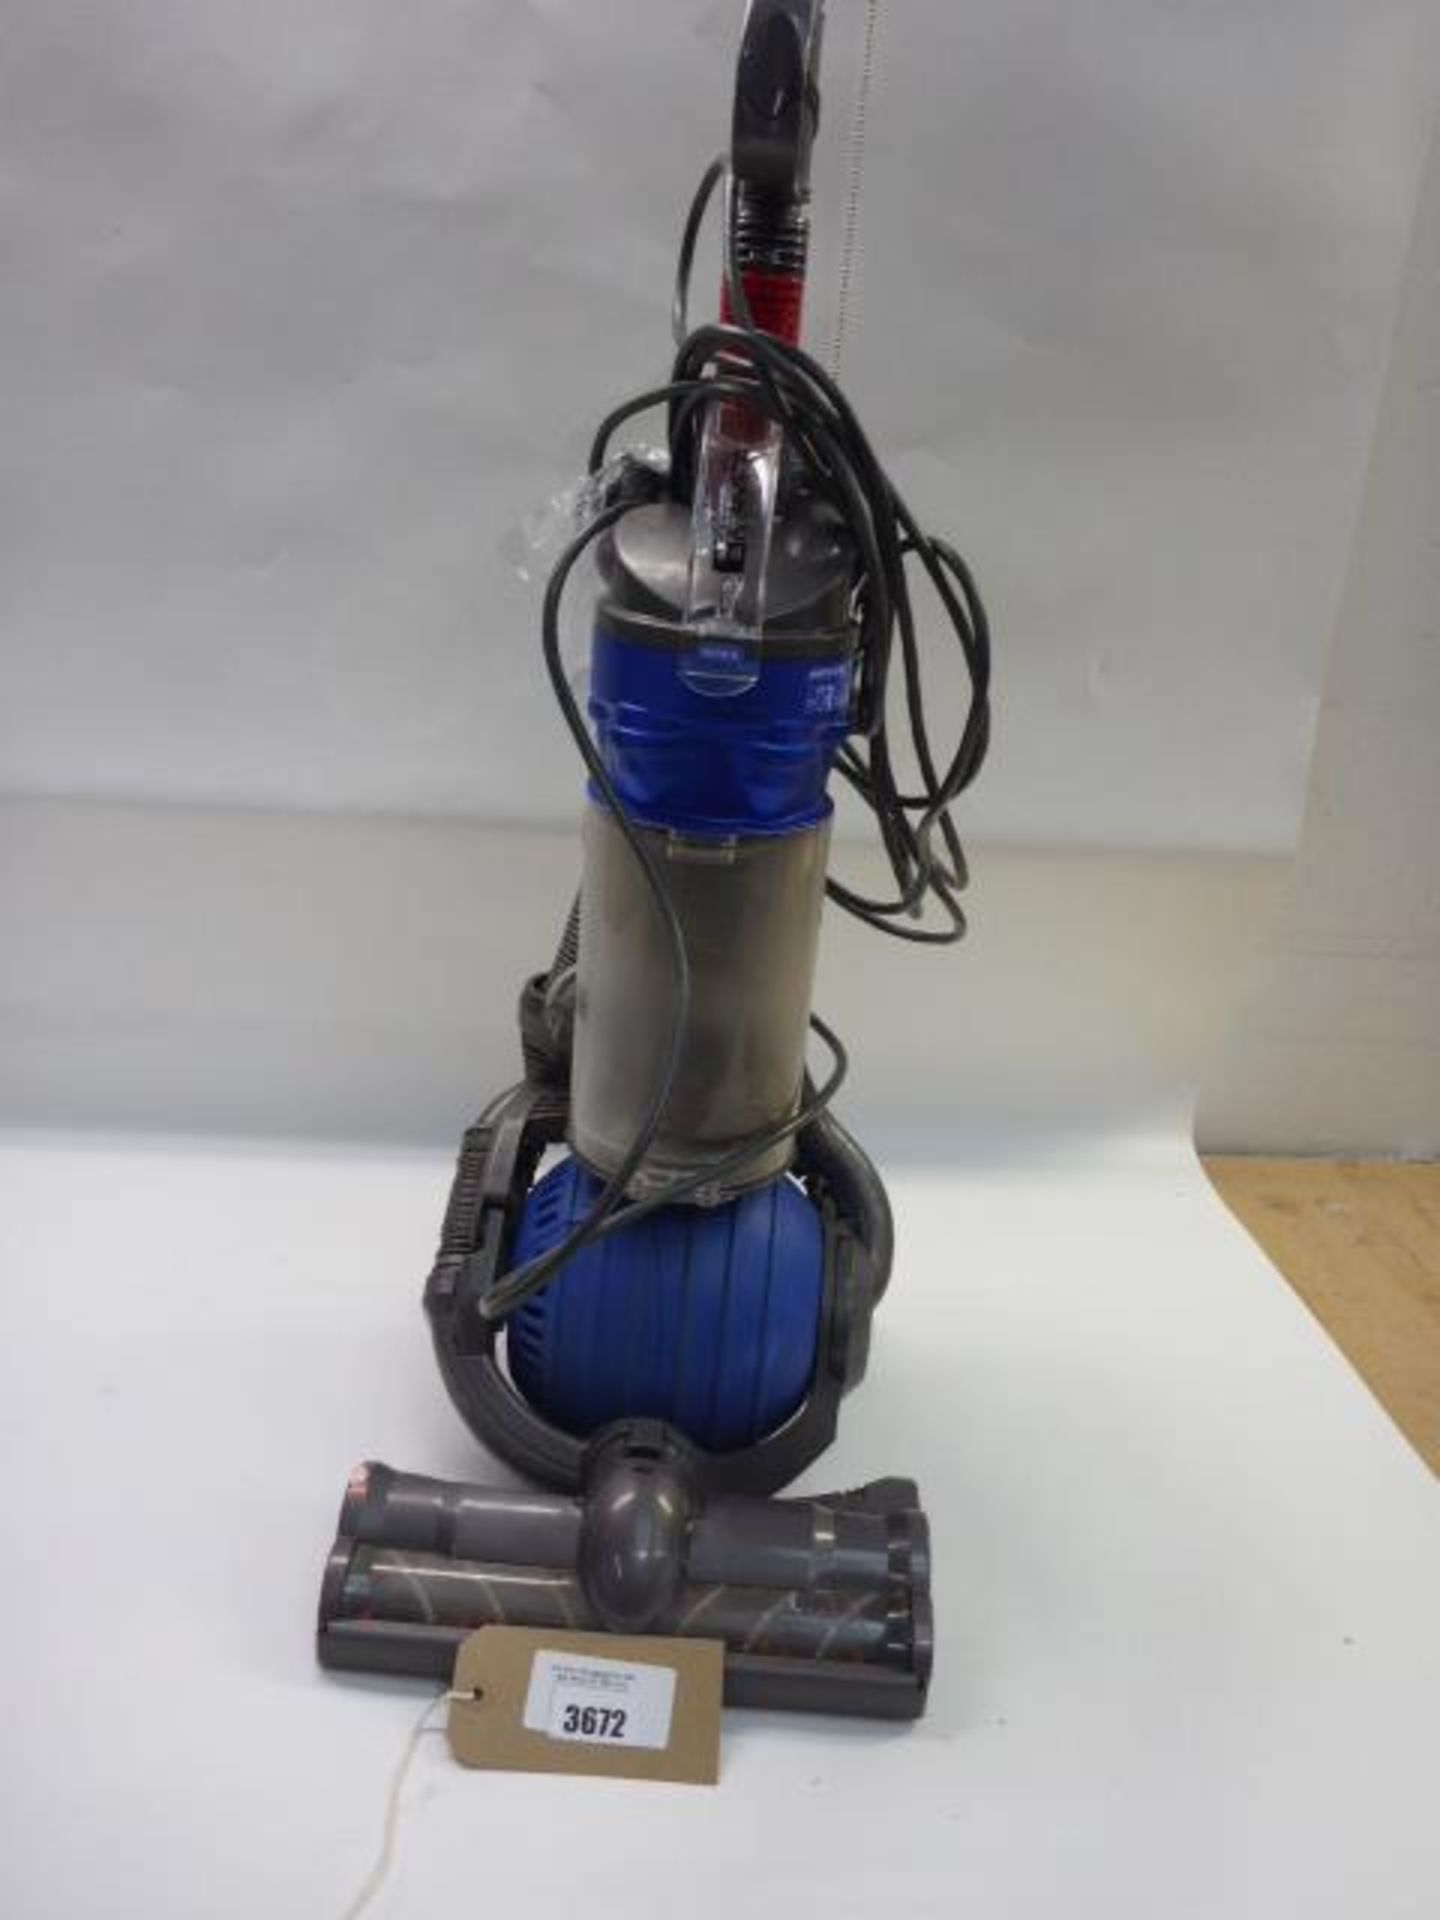 Dyson DC24 vacuum cleaner (used)